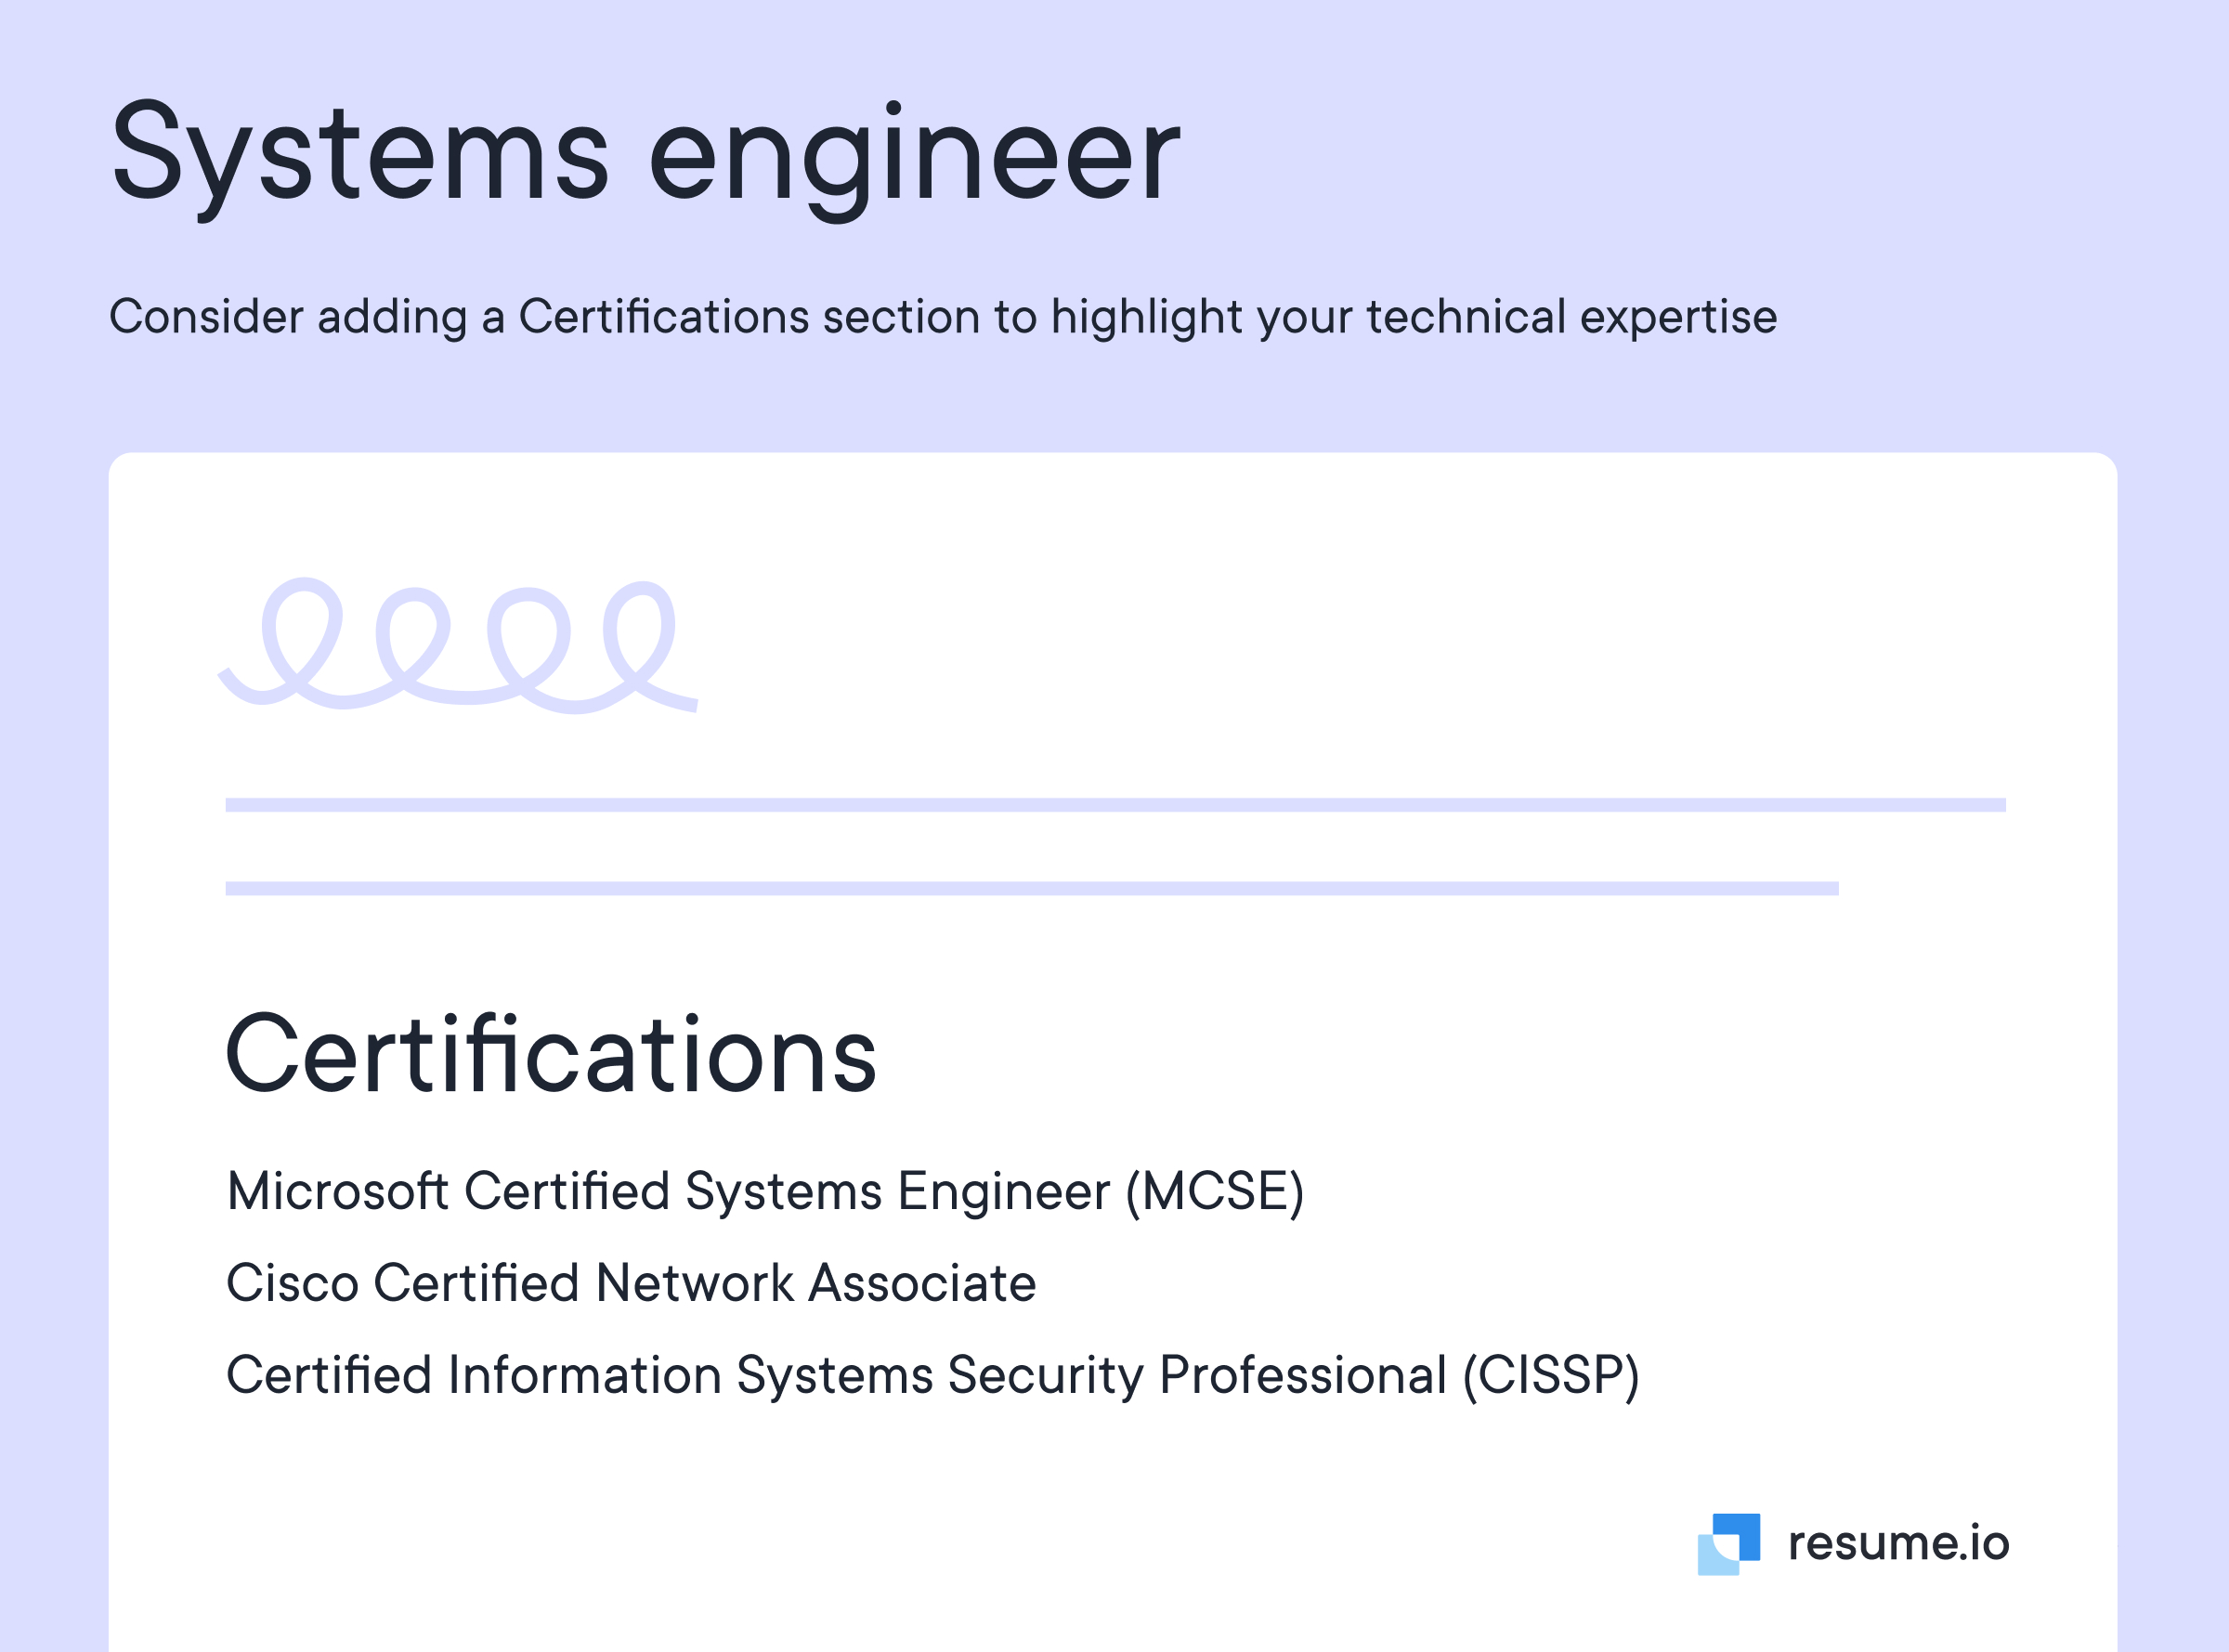 Certifications section to highlight your technical expertise